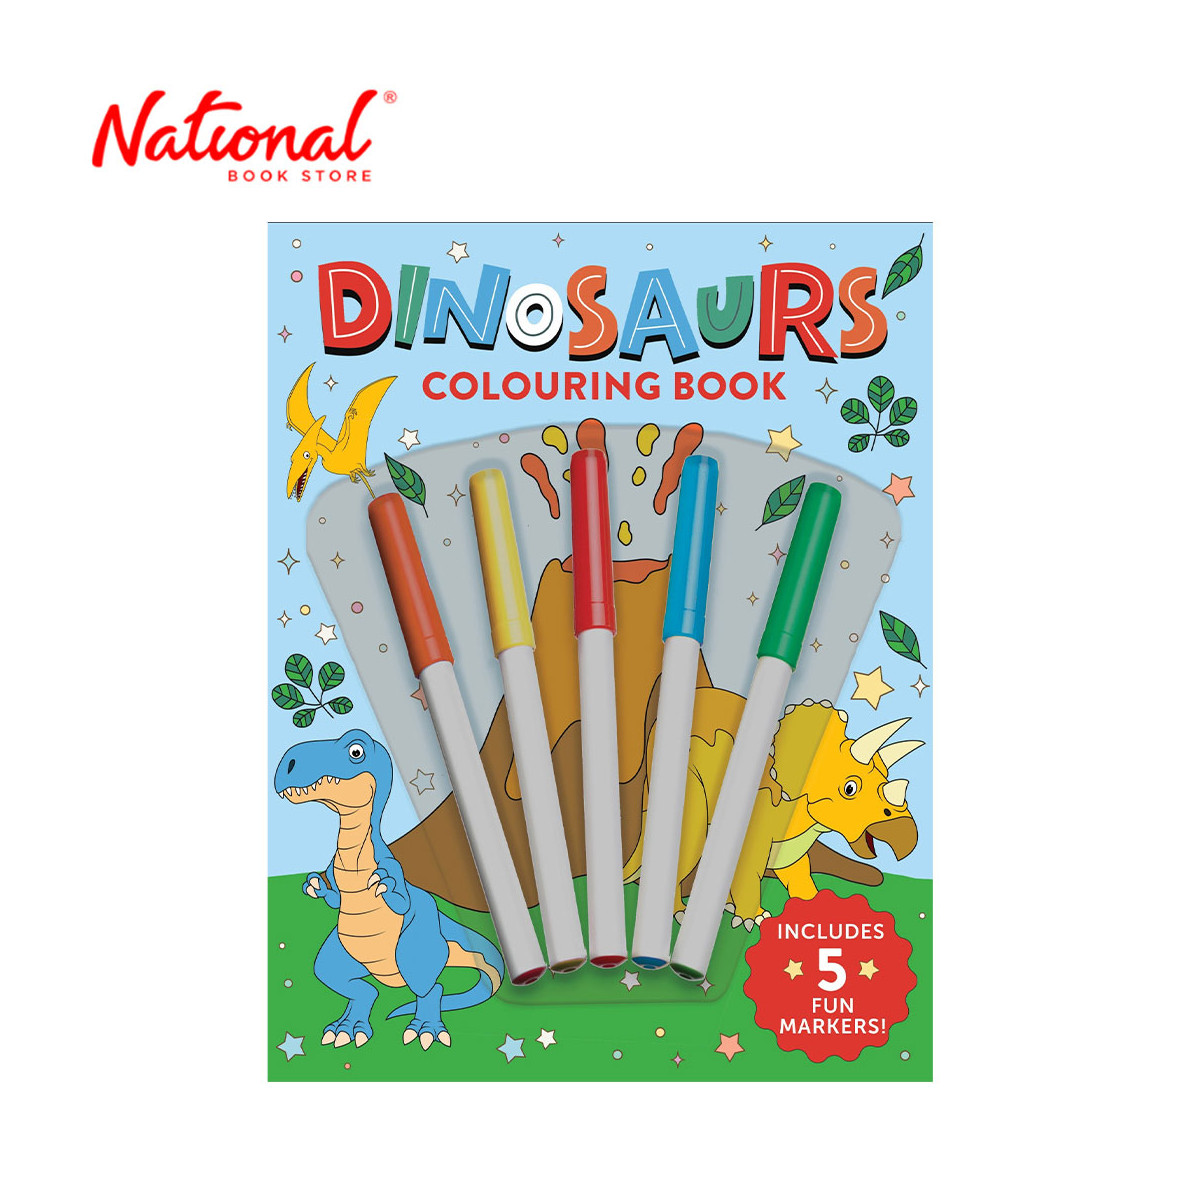 Colour Fun Dinosaurs - Trade Paperback - Activity Books for Kids